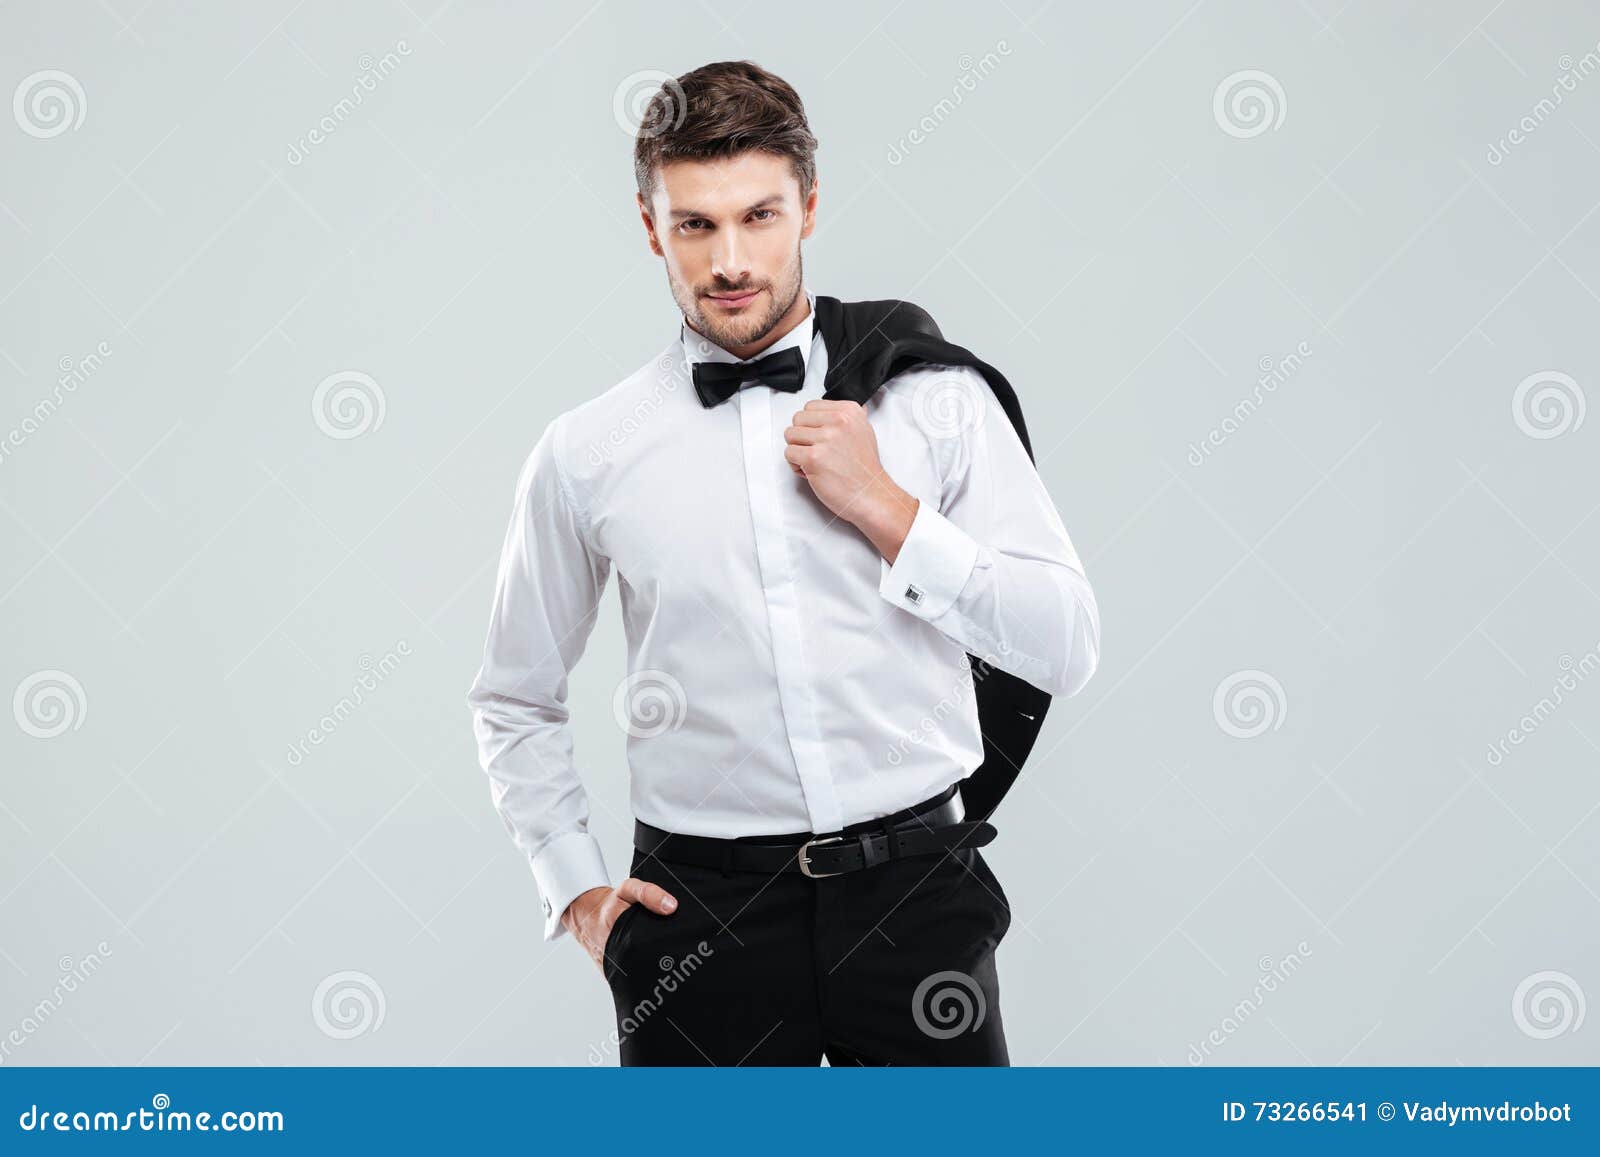 Gorgeous Young Man in Tuxedo Standing Stock Image - Image of adult ...